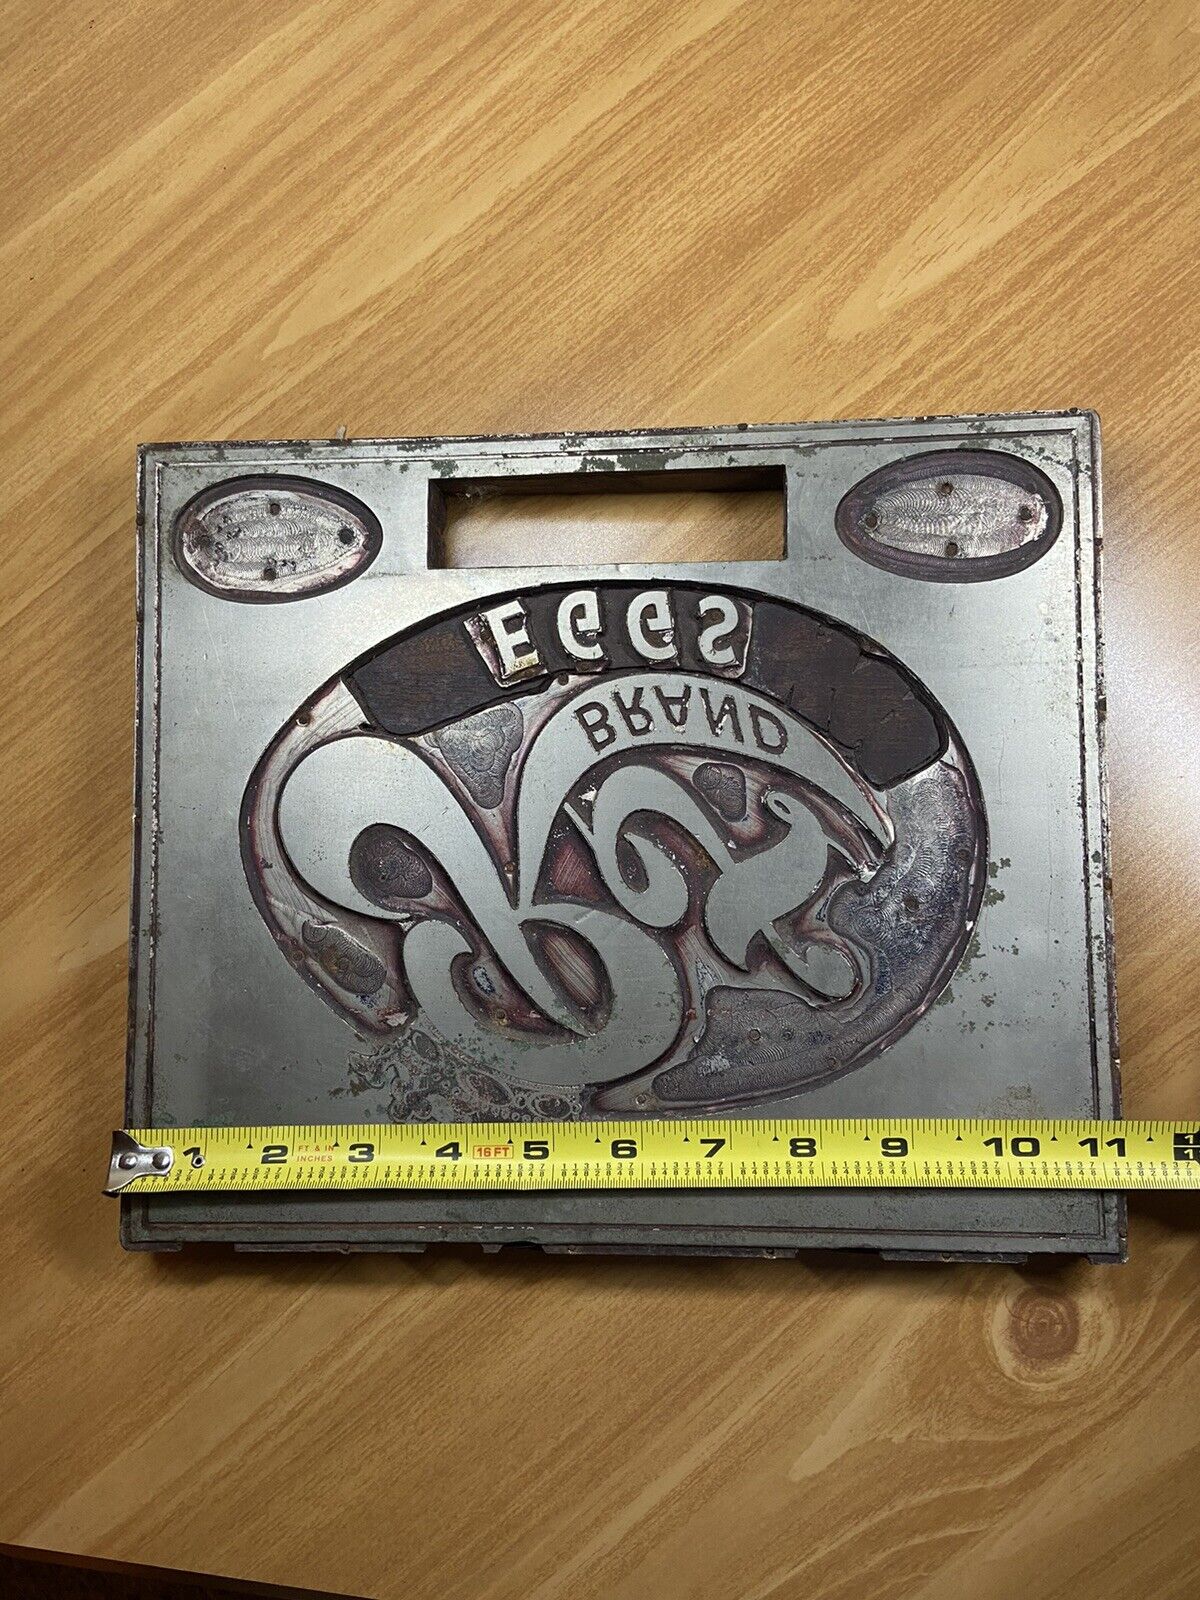 Vintage Rex Brand Eggs Solid Steel Wooden Egg Crate Ink Stamp Plate 1930s-1950s.